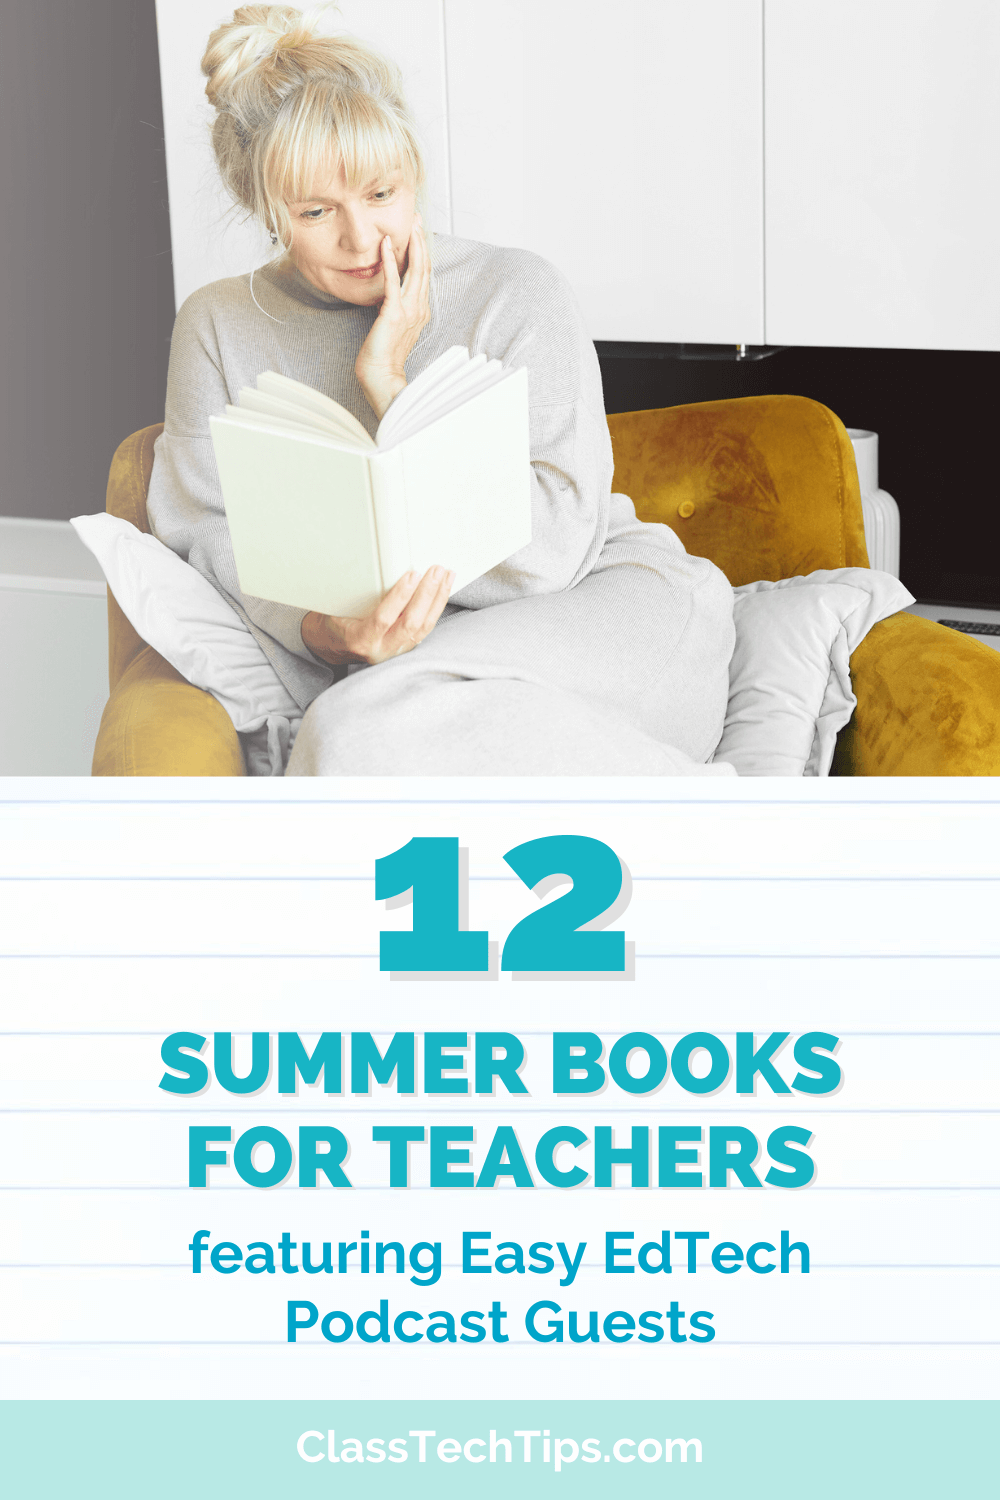 A teacher sits comfortably in a chair, engrossed in a book, with "12 SUMMER BOOKS FOR TEACHERS featuring Easy EdTech Podcast Guests" written above.